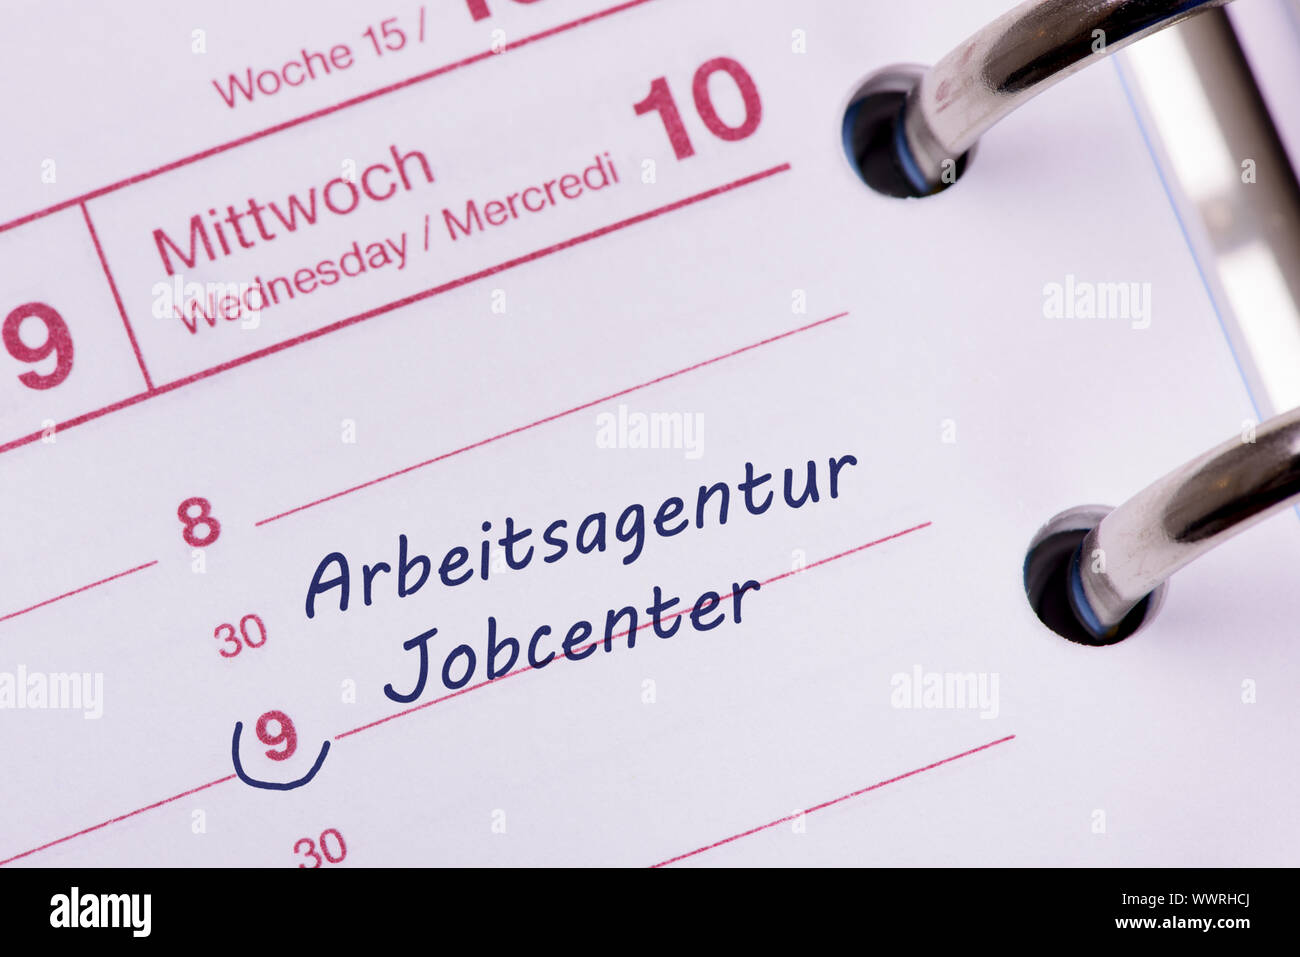 Appointment calendar with entry for employment agency and job centre Stock Photo